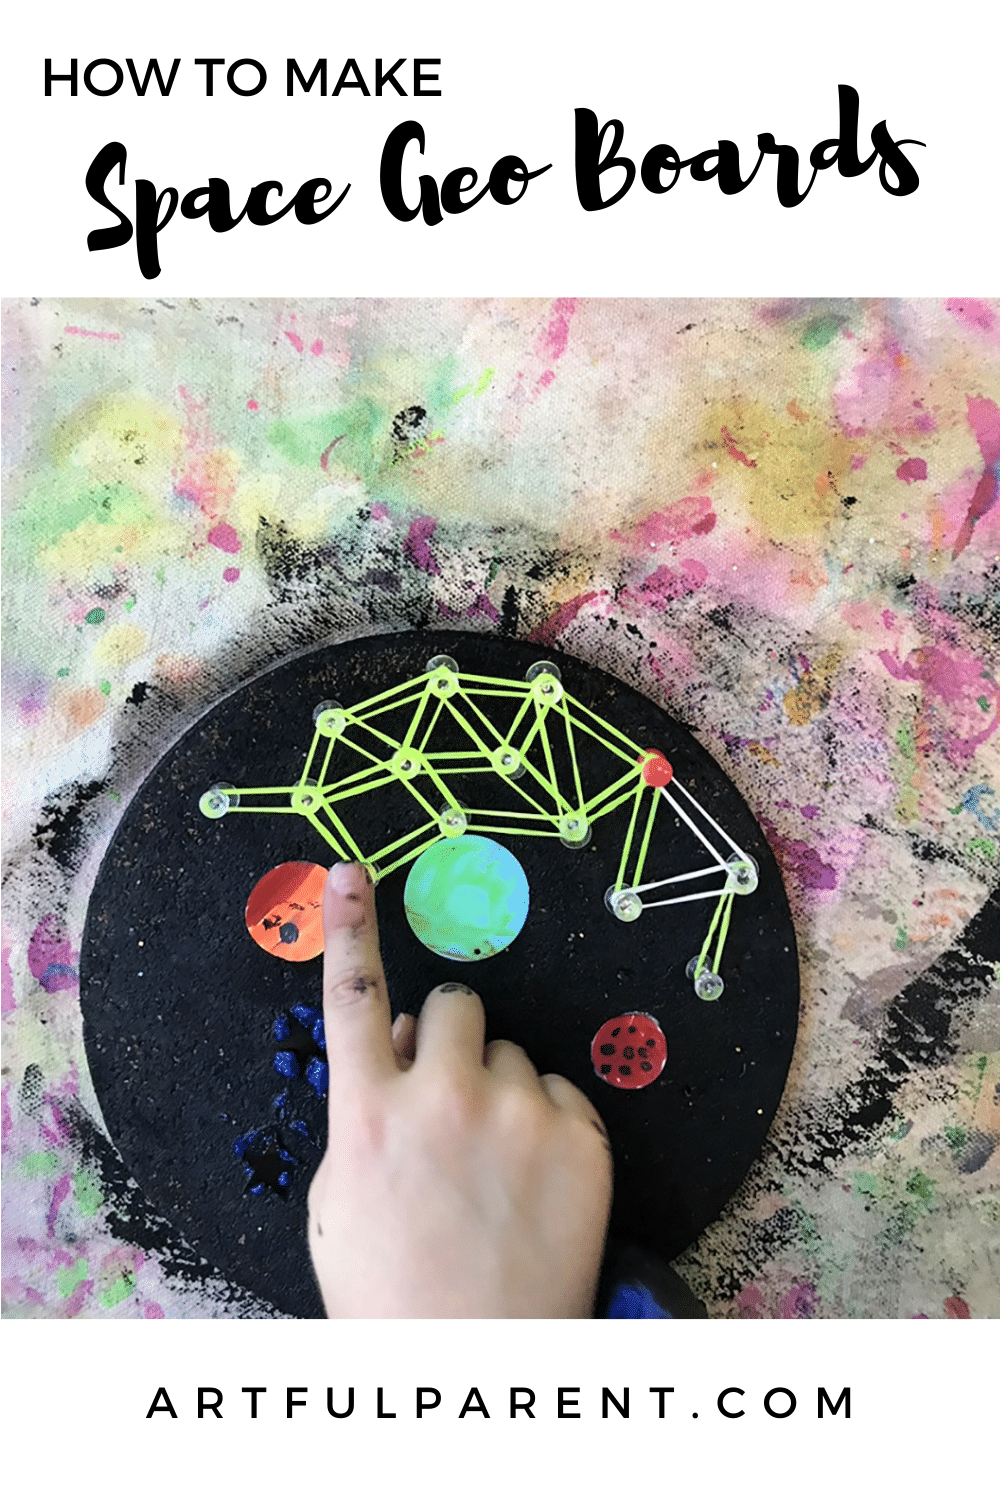 How to Make DIY Space Geoboards for Kids